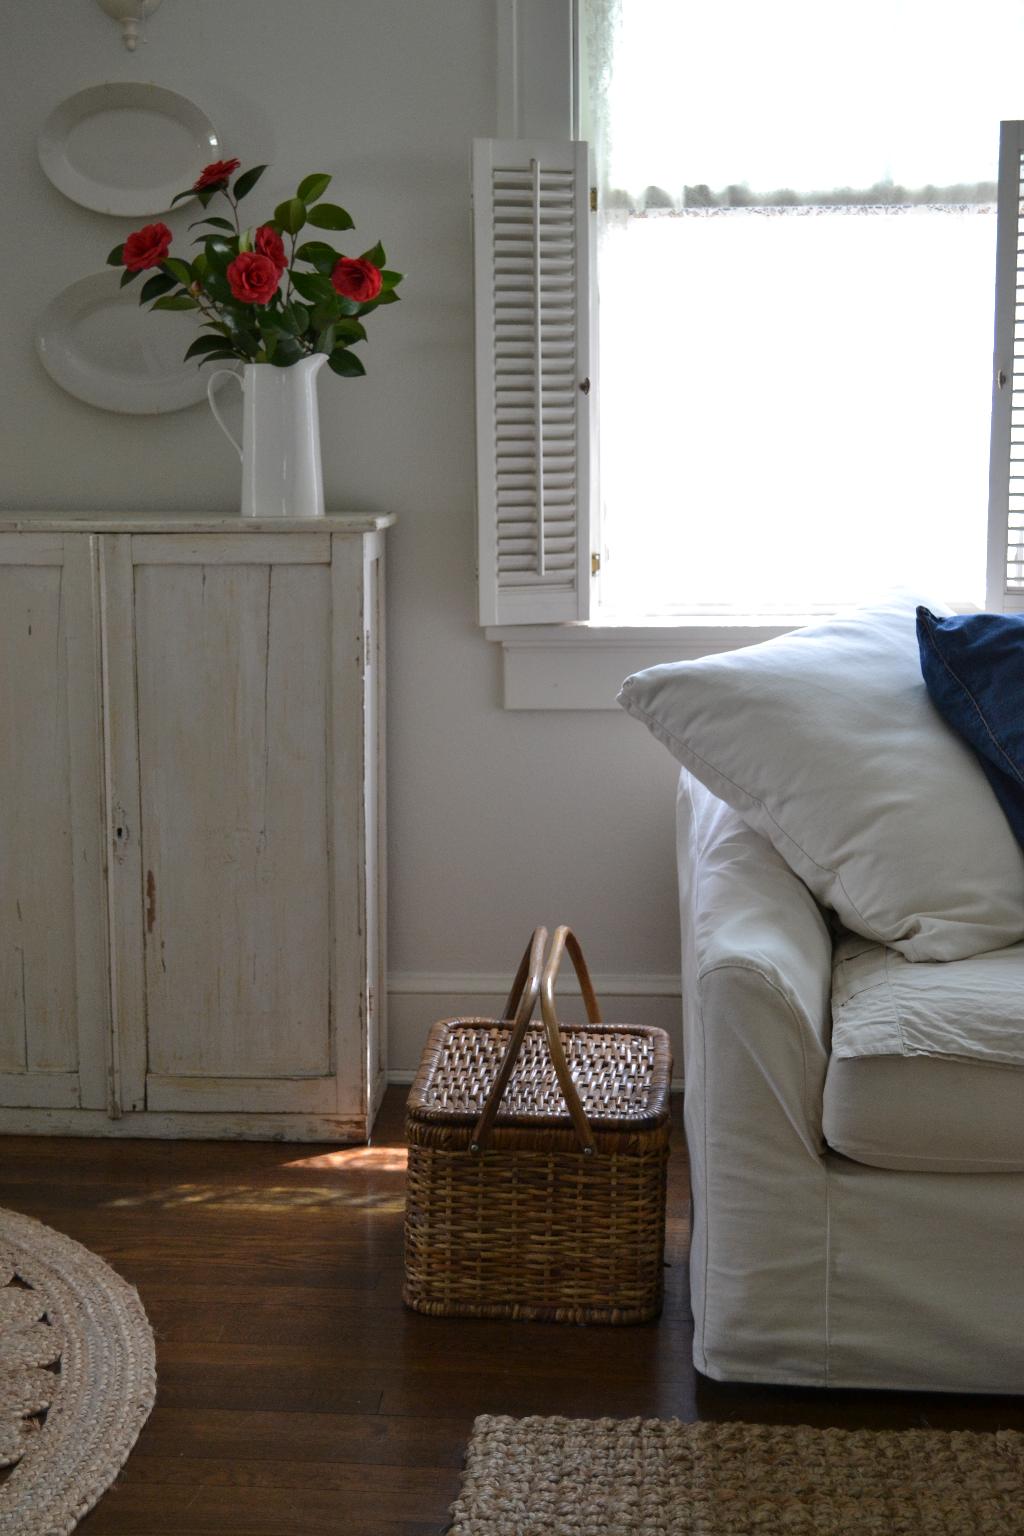 Cottage Fix blog - warm whites, red camellias, and a picnic basket